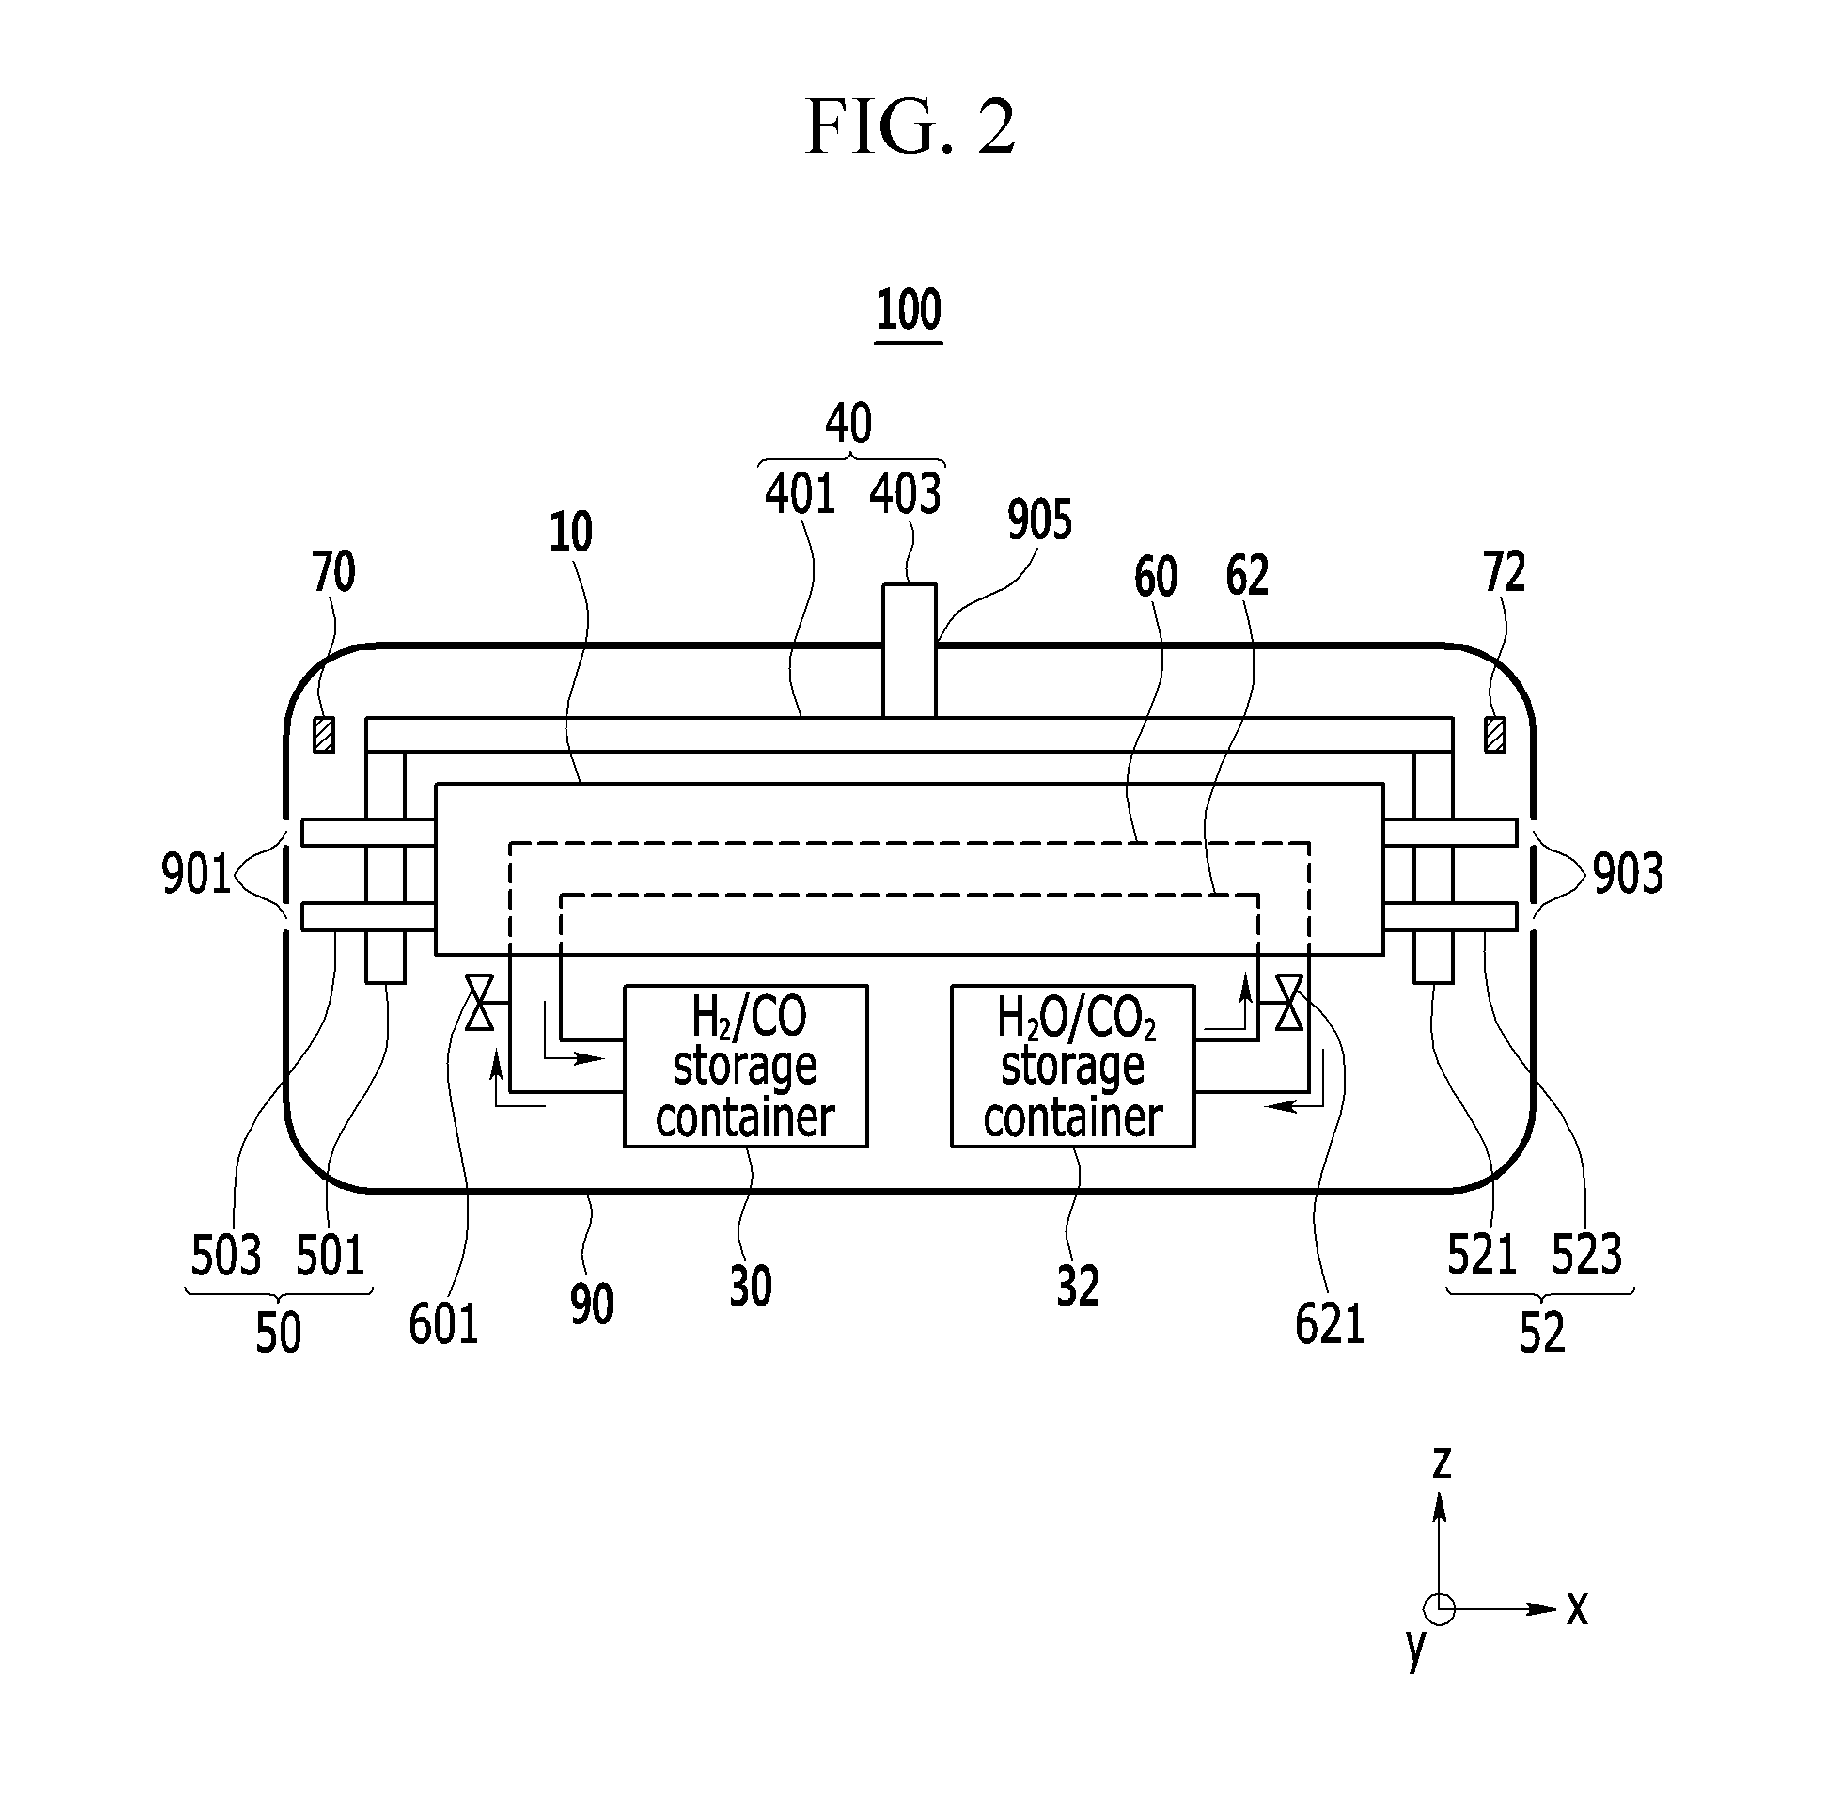 Hybrid electrochemical cell